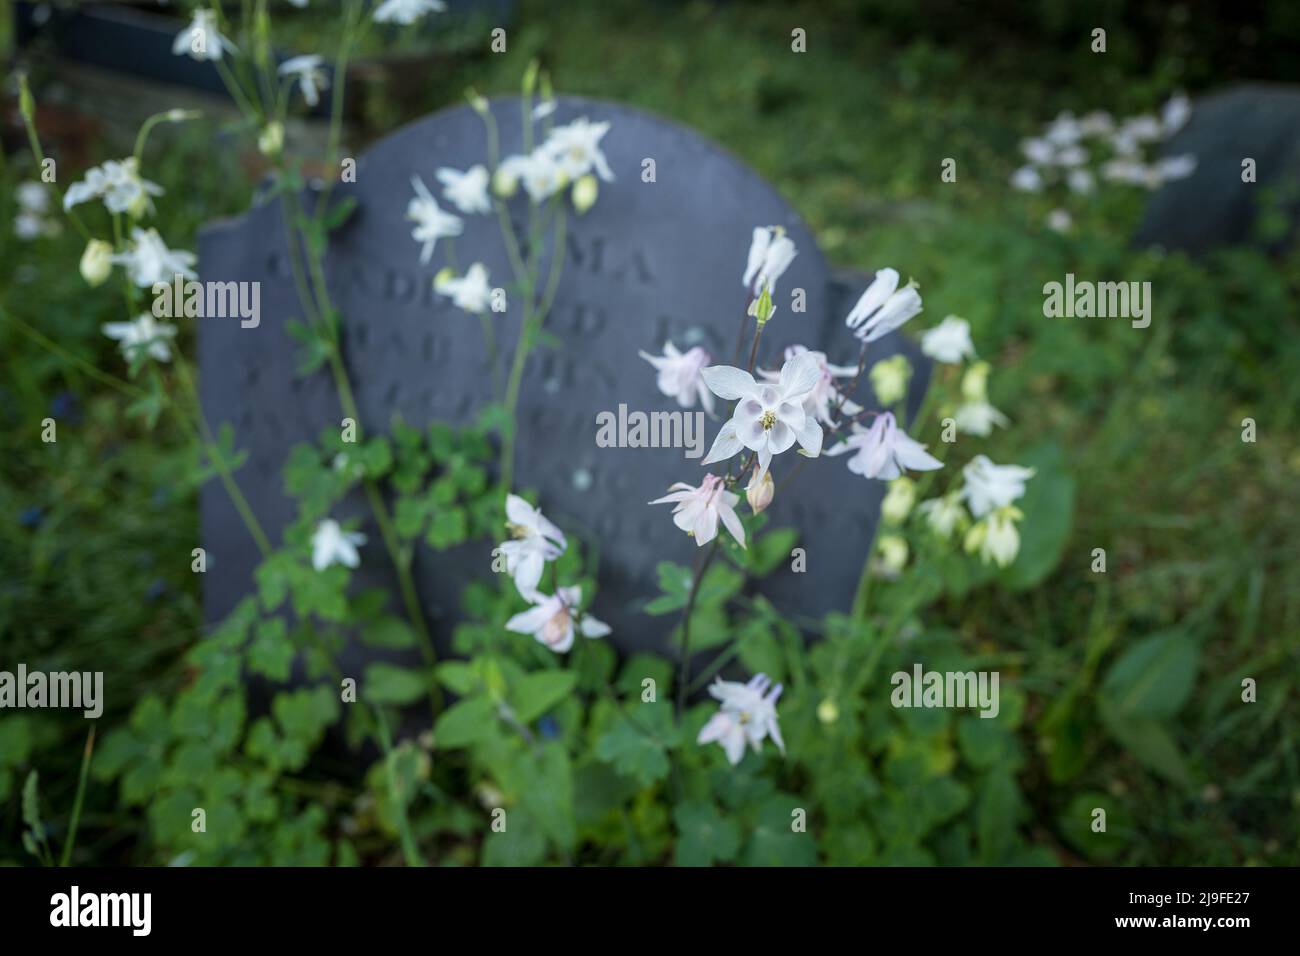 Aquilegia vulgaris or Granny's Bonnet growing wild in an Welsh village church grave yard with slate grave stones. Stock Photo